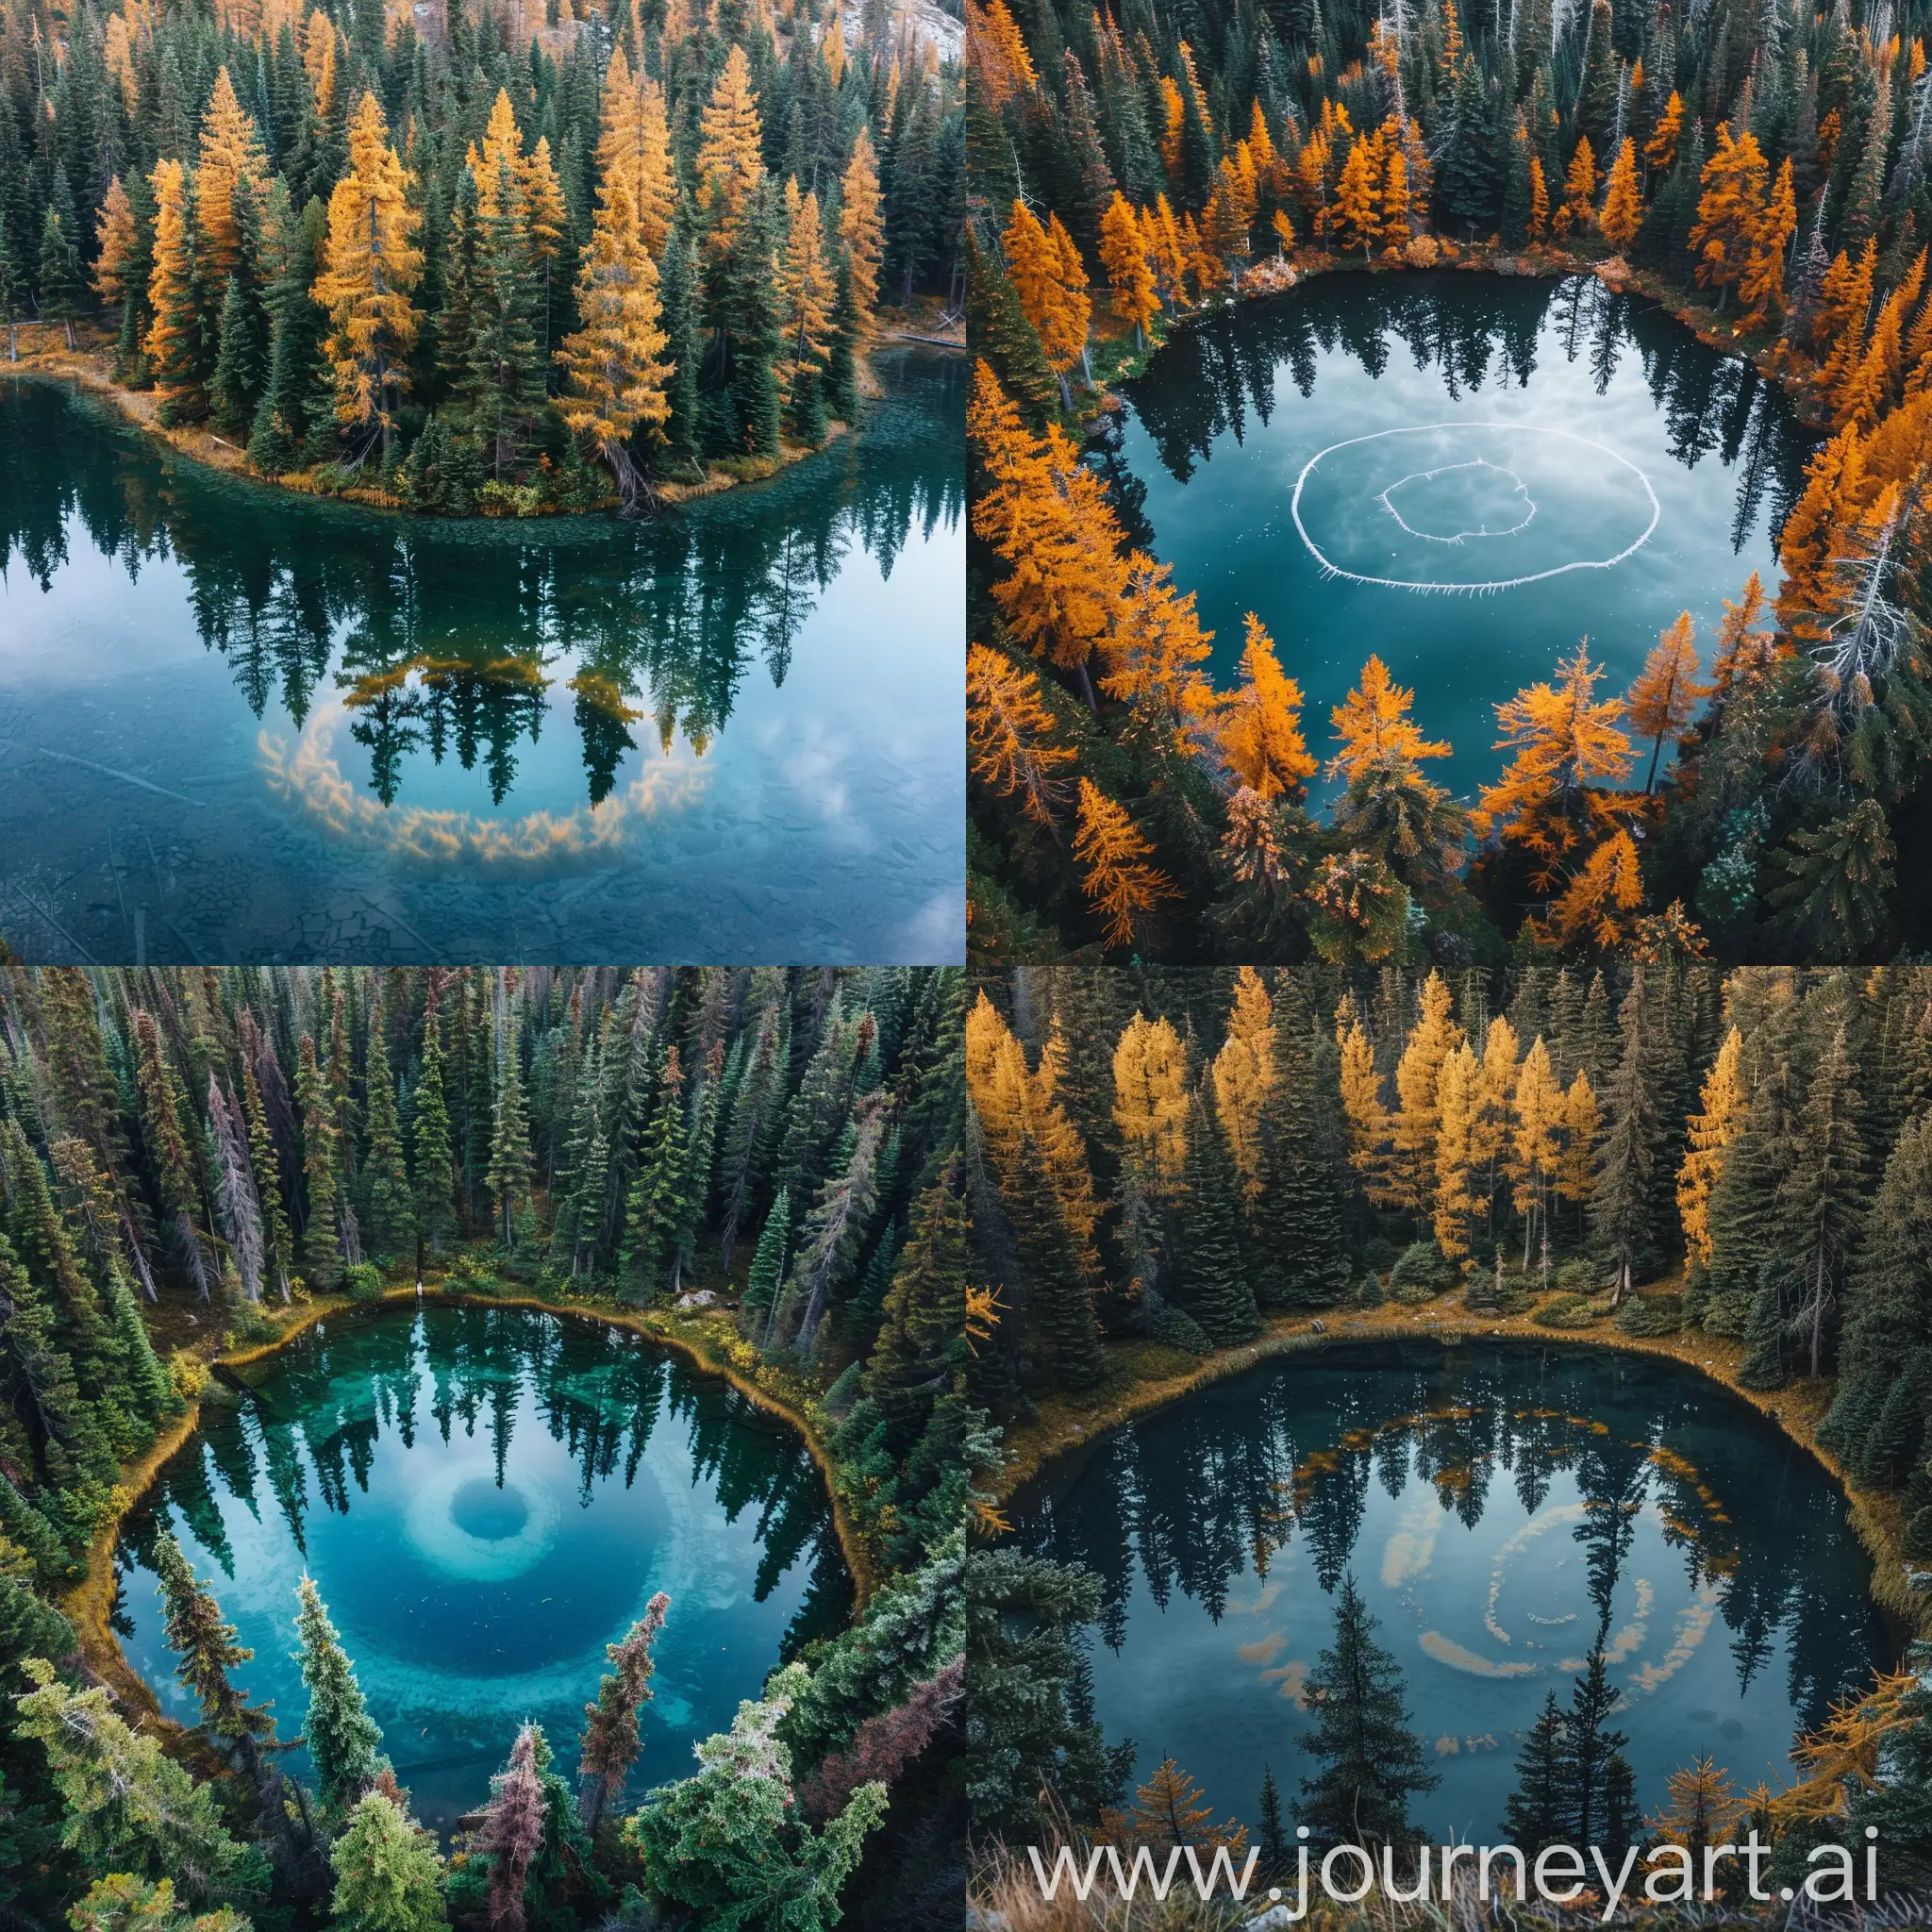 round lake in pine forest, trees reflect in water forming ying yang circle